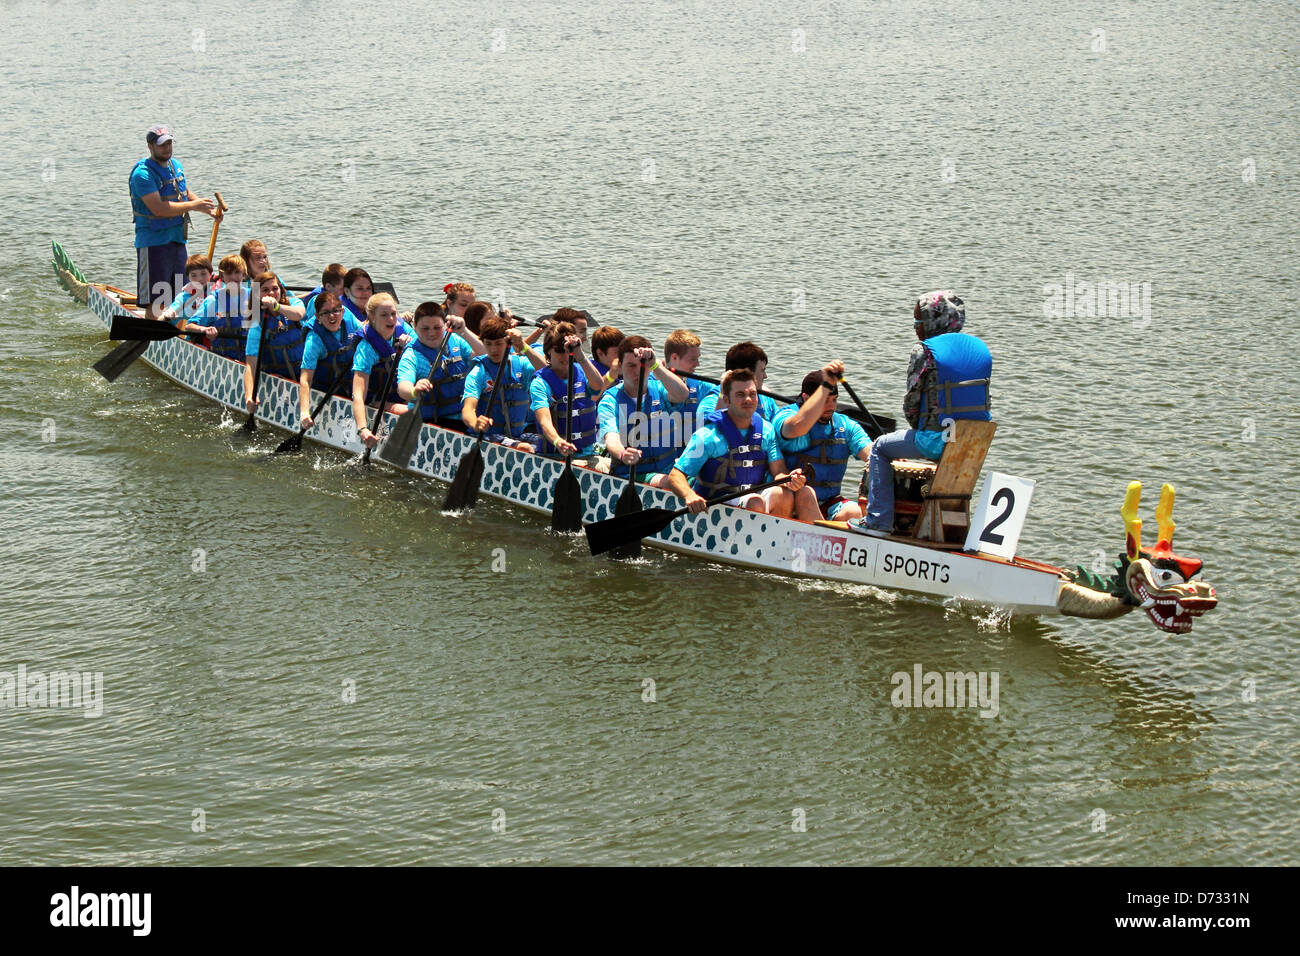 A Team races at the Ground Zero Dragon Boat Races in Myrtle Beach, SC